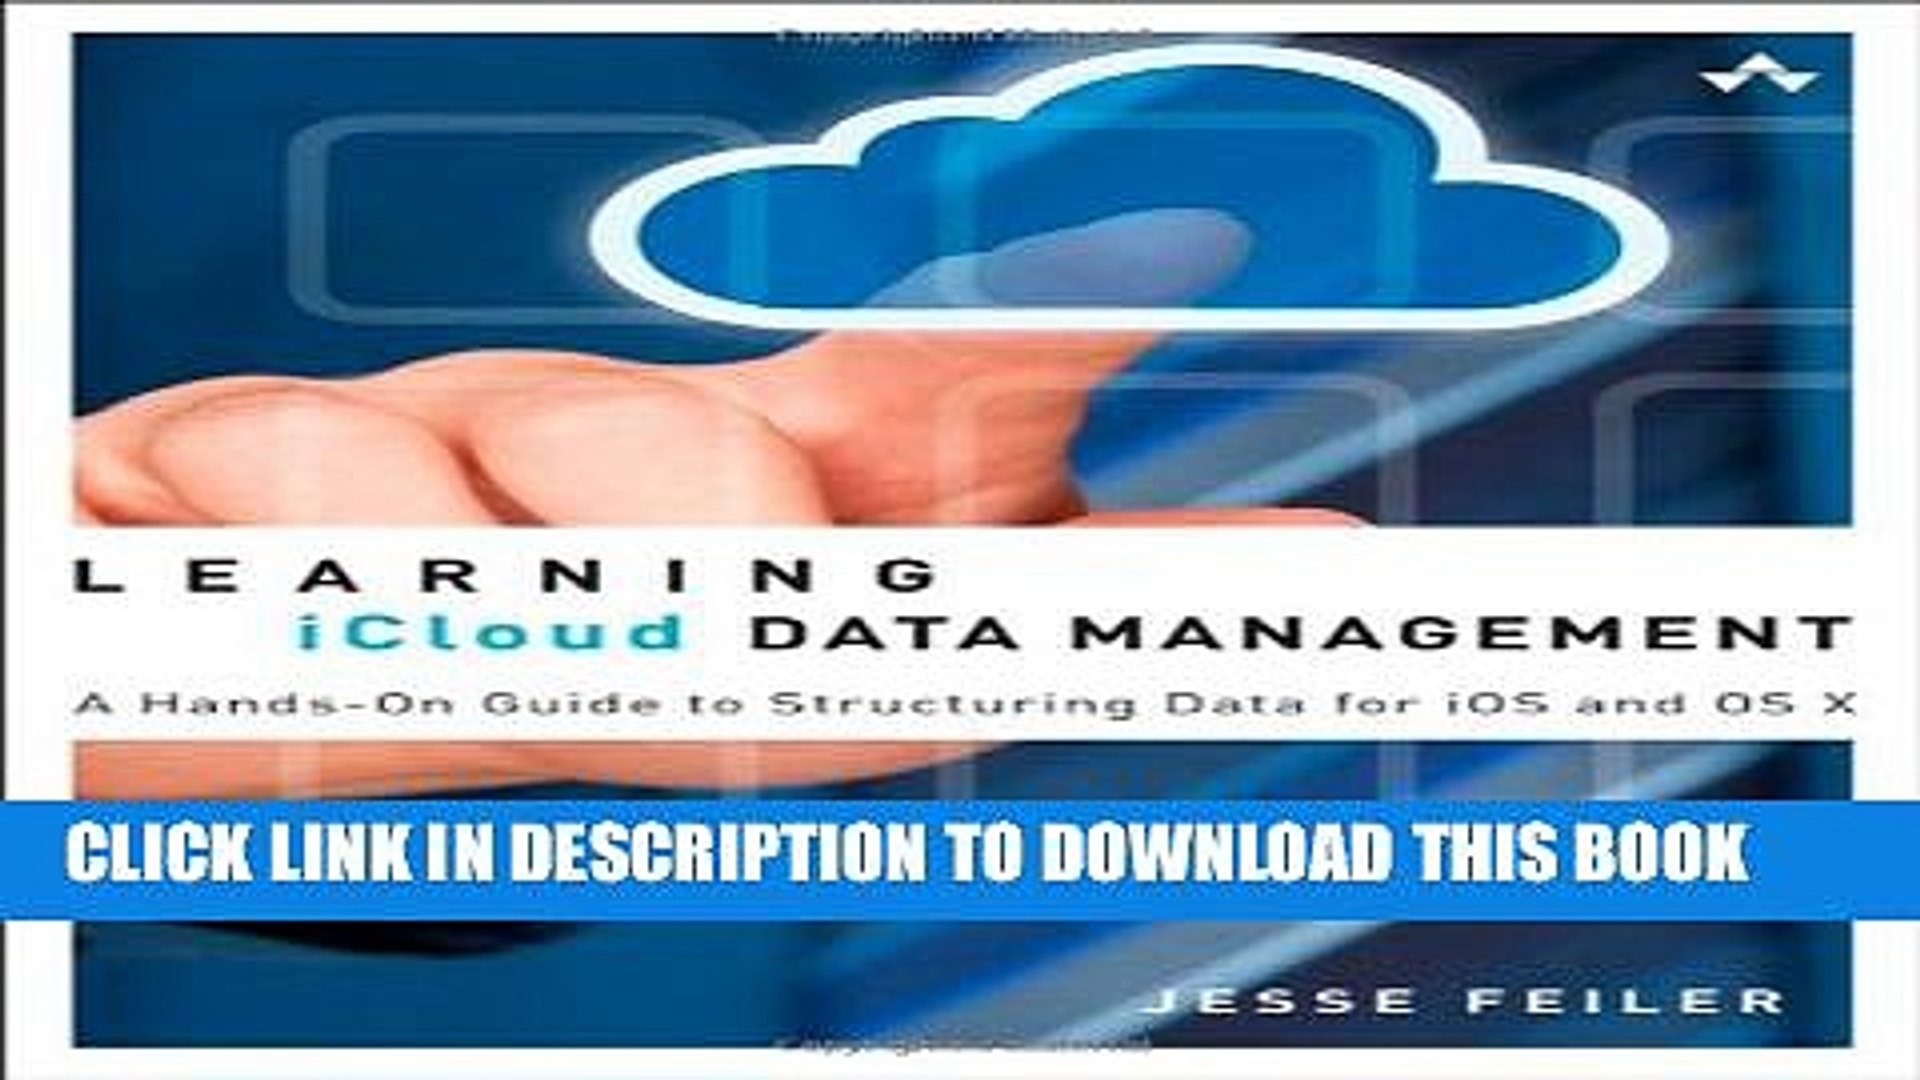 [Read PDF] Learning iCloud Data Management: A Hands-On Guide to Structuring Data for iOS and OS X